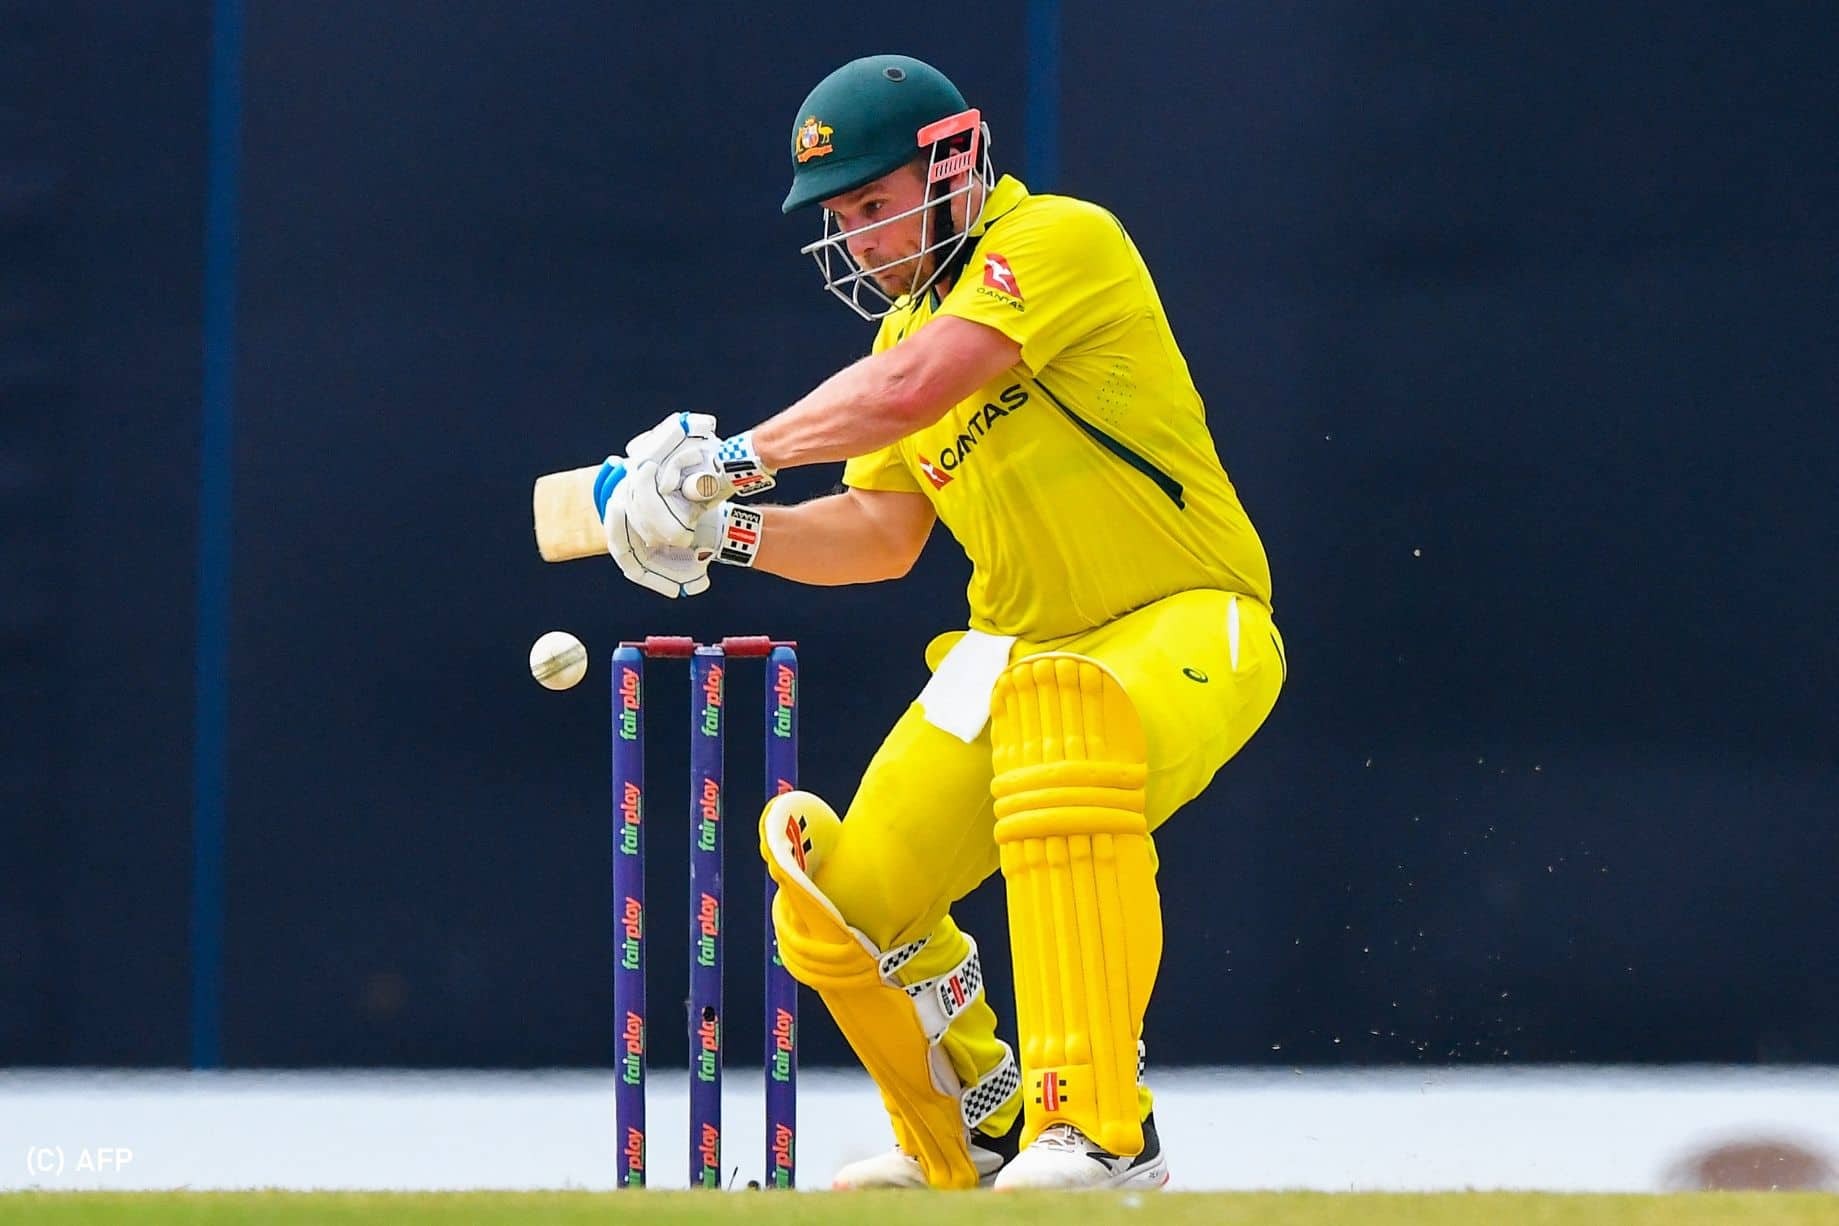 Aaron Finch announces retirement from ODI cricket
